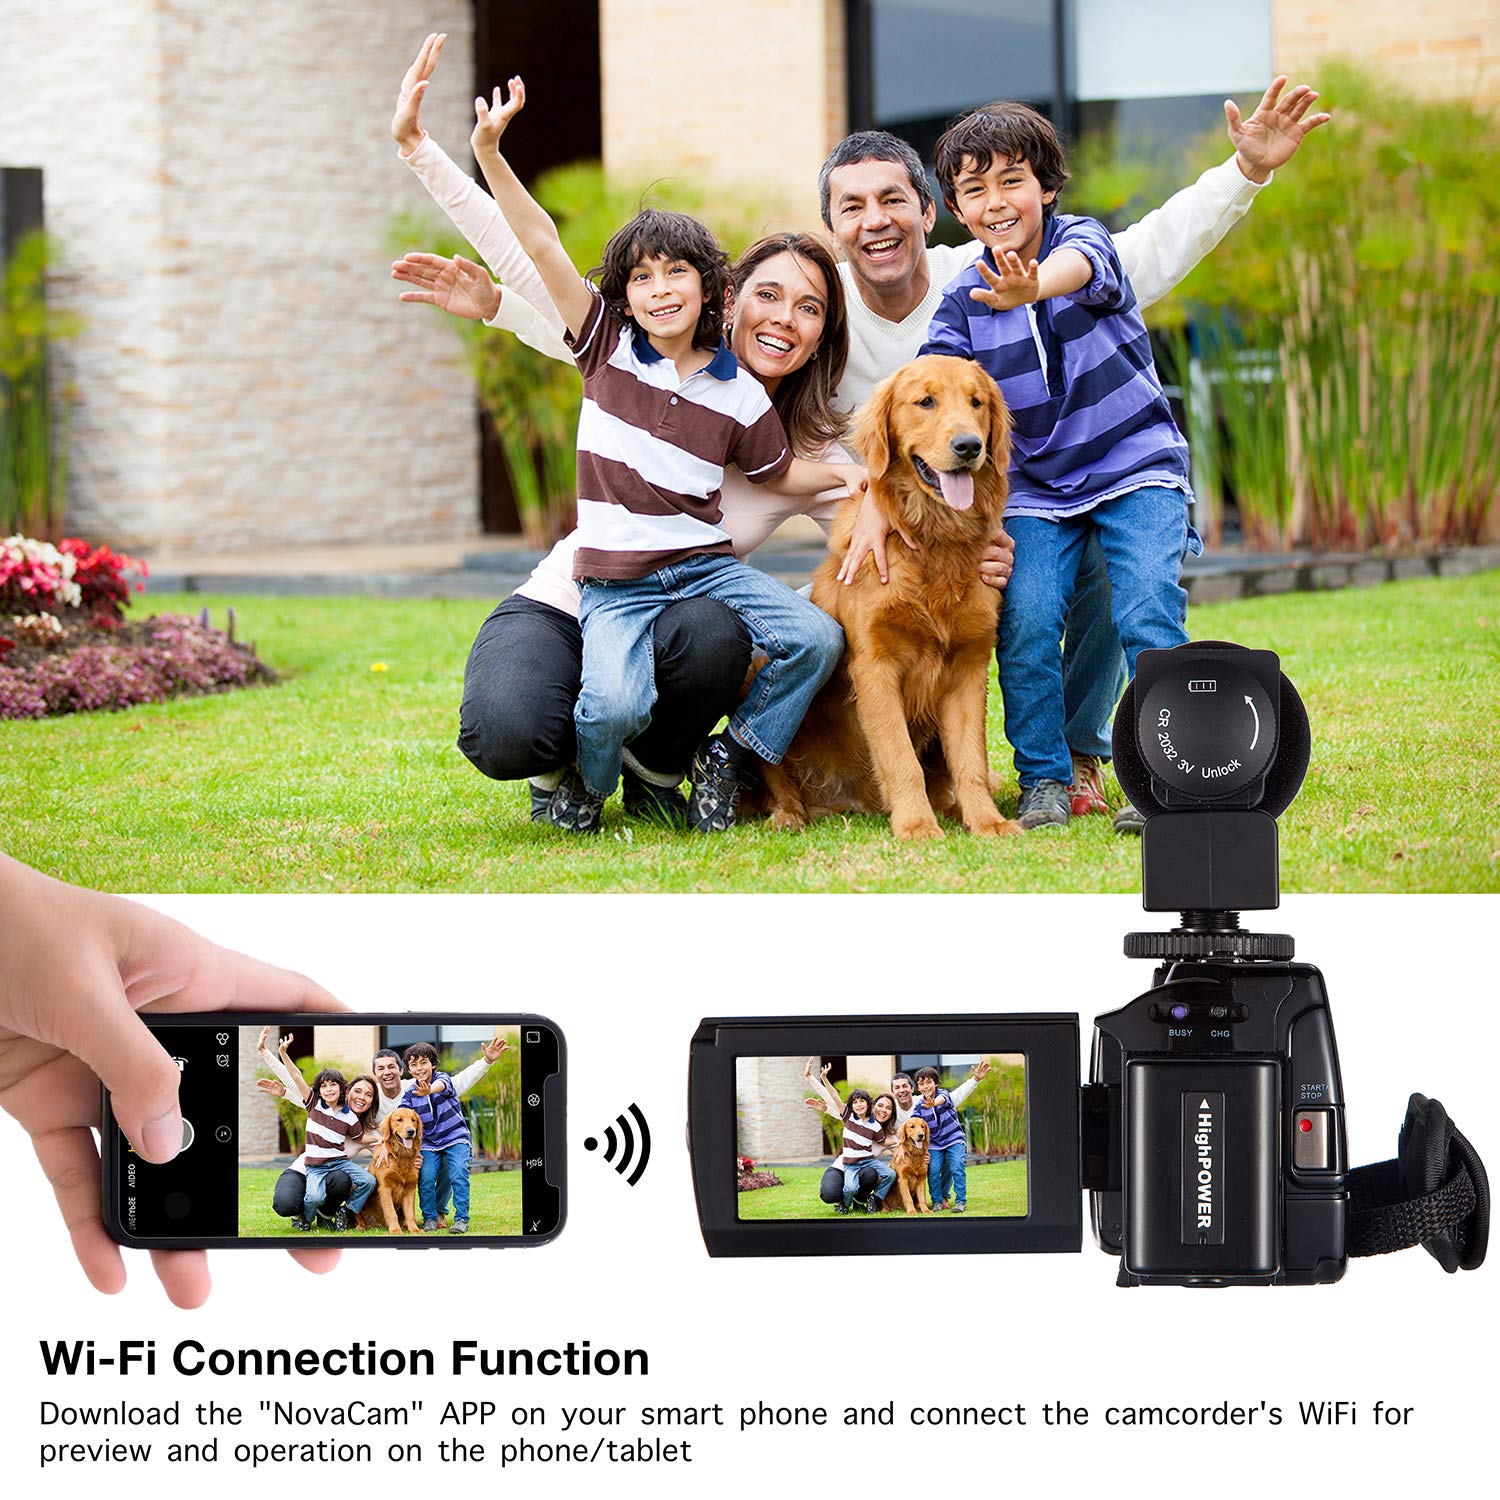 KOT 4K Camcorder Video Camera HD WiFi 3.0 Inch IPS Touch Screen 48MP 16X Powerful Digital Zoom Camera with Microphone and Wide Angle Lens IR Night Vision Vlogging Video Camera Recorder Handy cam